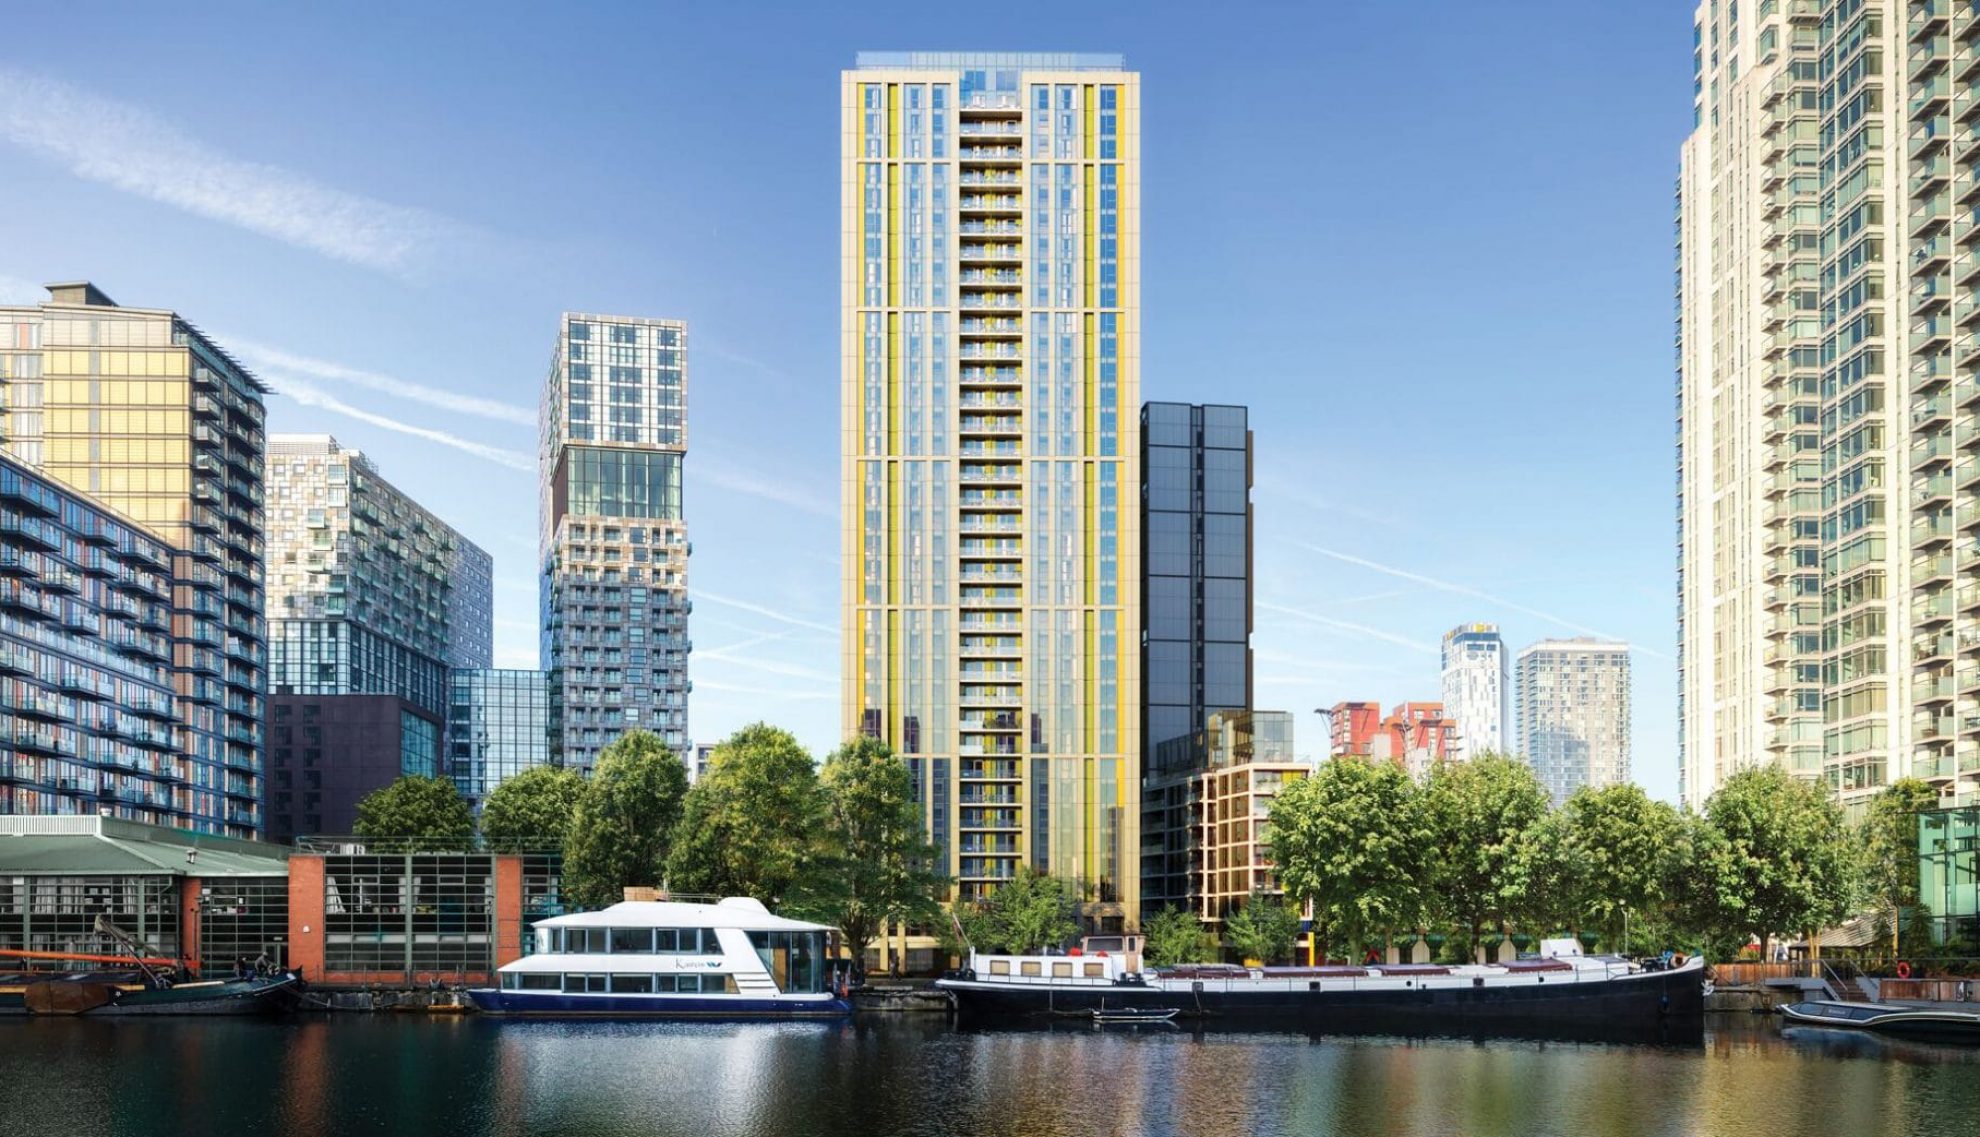 Some of the best rental flats in London at the Sailmakers development